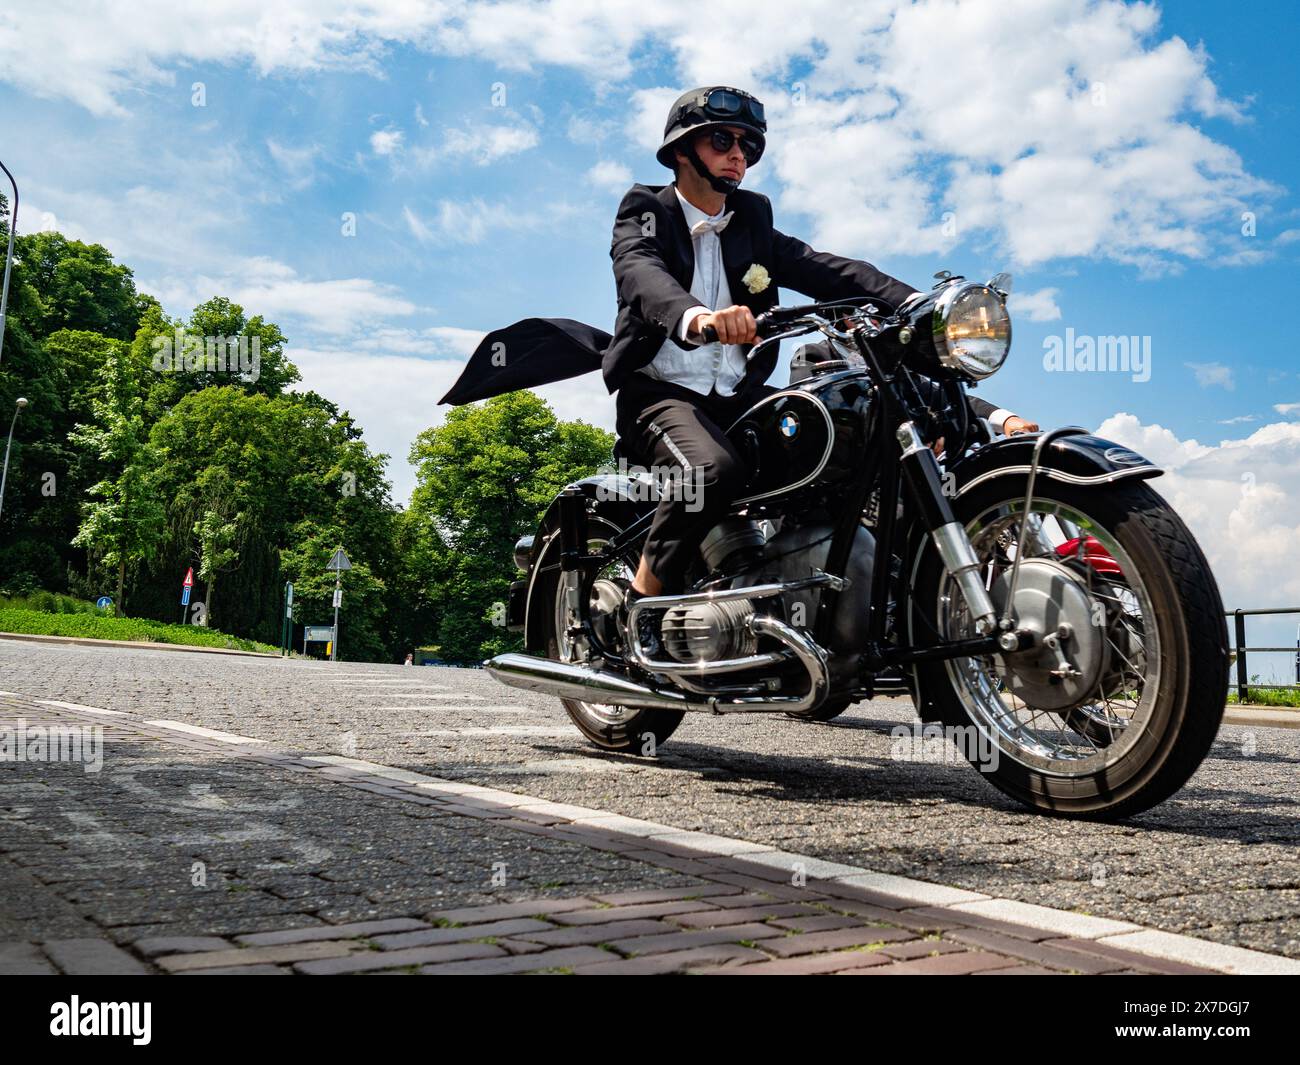 A man wearing a tuxedo jacket rides a motorbike. The Distinguished Gentleman's Ride unites classic and vintage-style motorcycle riders worldwide to raise funds and awareness for prostate cancer research and men's mental health. In Nijmegen more than two hundred motorcycle riders, raised around 30.000€.The Distinguished Gentleman's Ride (DGR) raises funds for The Movember Foundation, the leading global charity changing the face of men's health, to improve the lives of men through prostate cancer research and men's mental health initiatives. Stock Photo